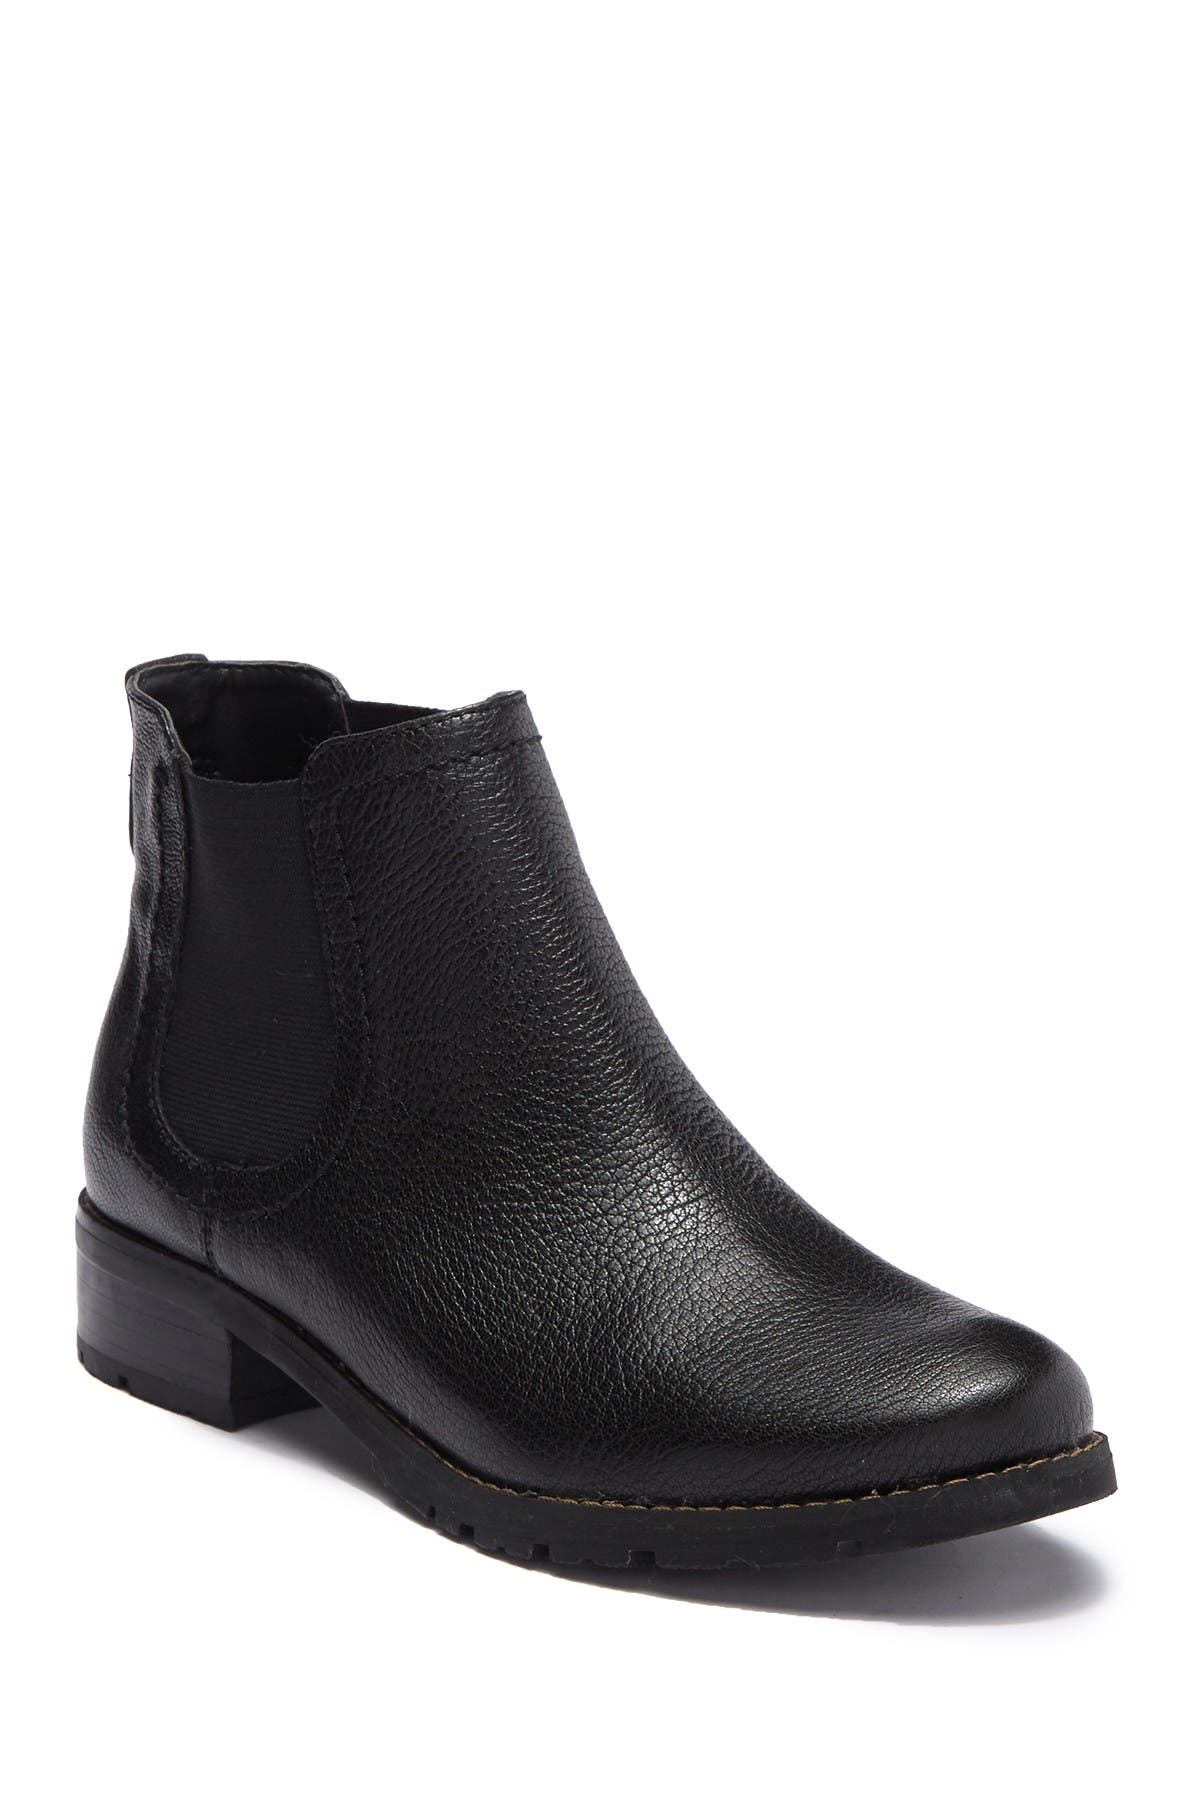 Sofft | Sherwood Leather Chelsea Boot 